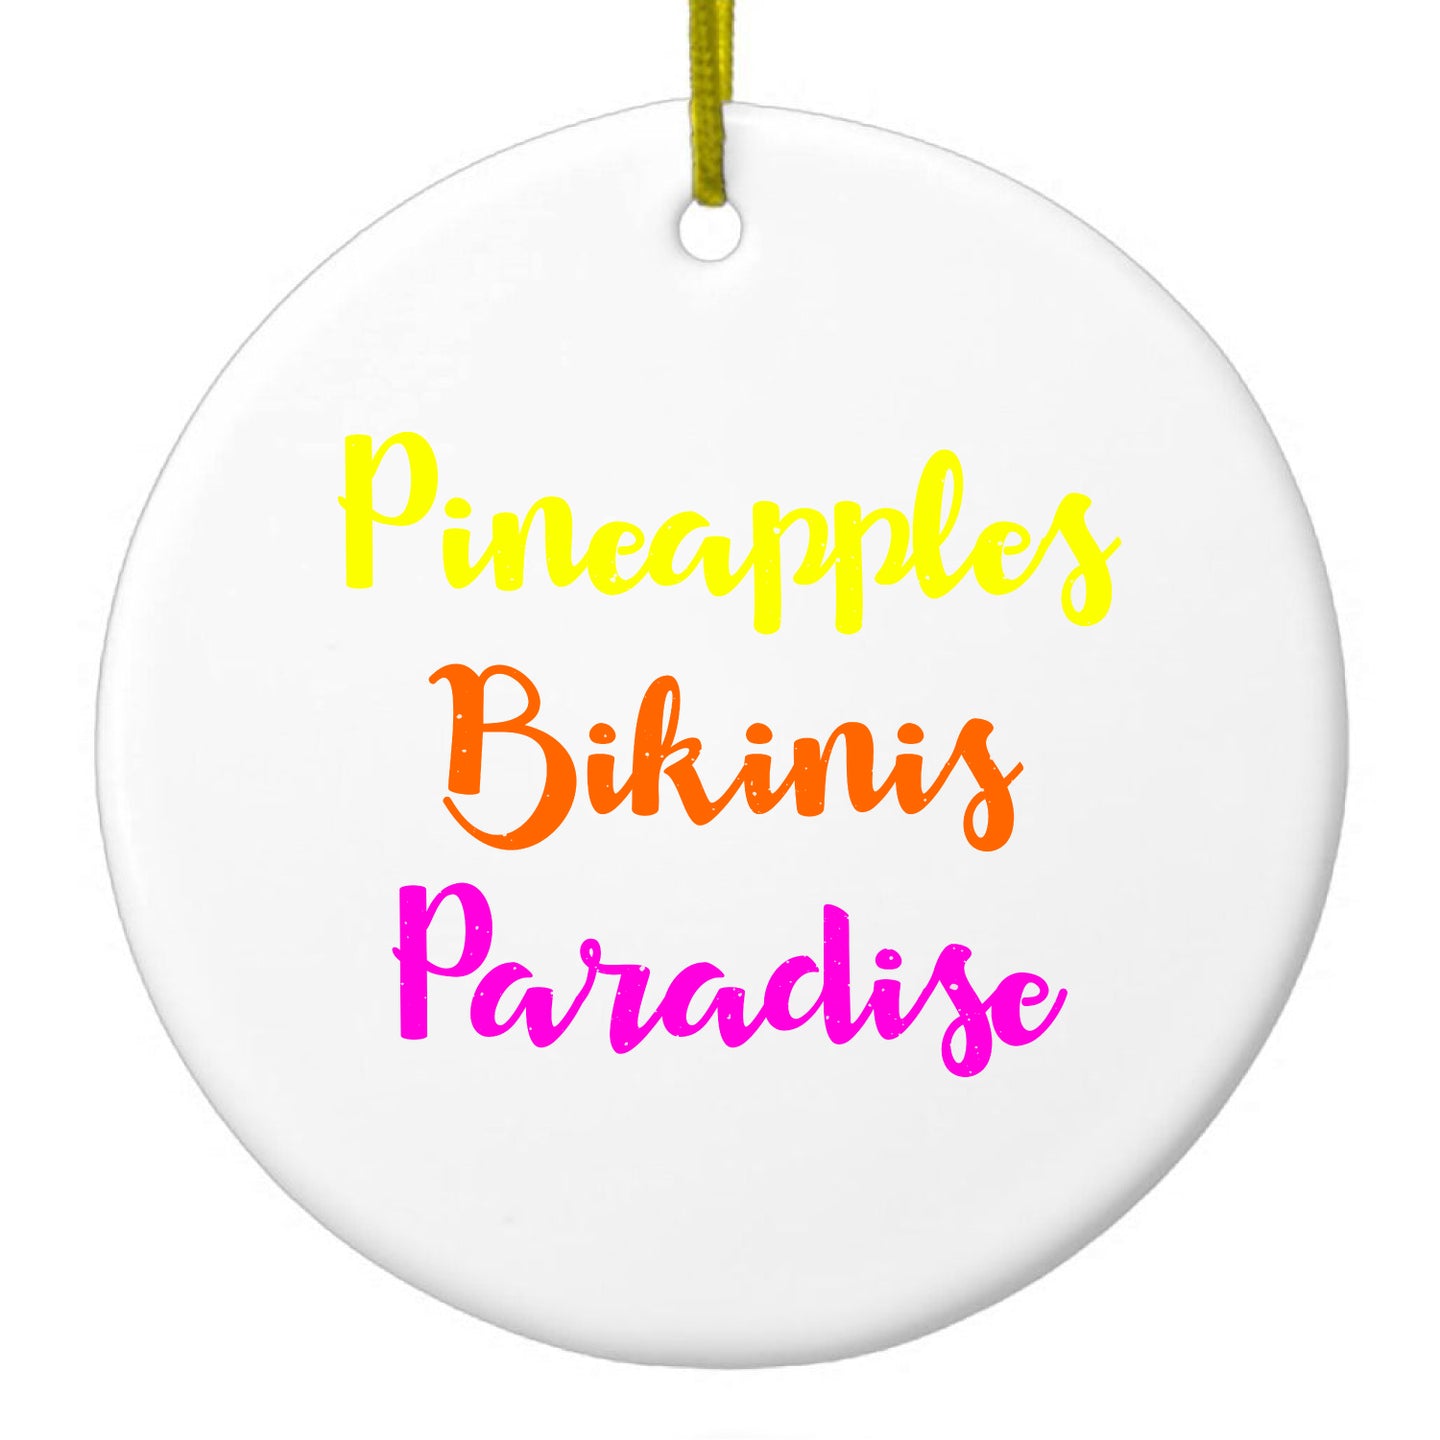 DistinctInk® Hanging Ceramic Christmas Tree Ornament with Gold String - Great Gift / Present - 2 3/4 inch Diameter - Pineapples Bikinis Paradise